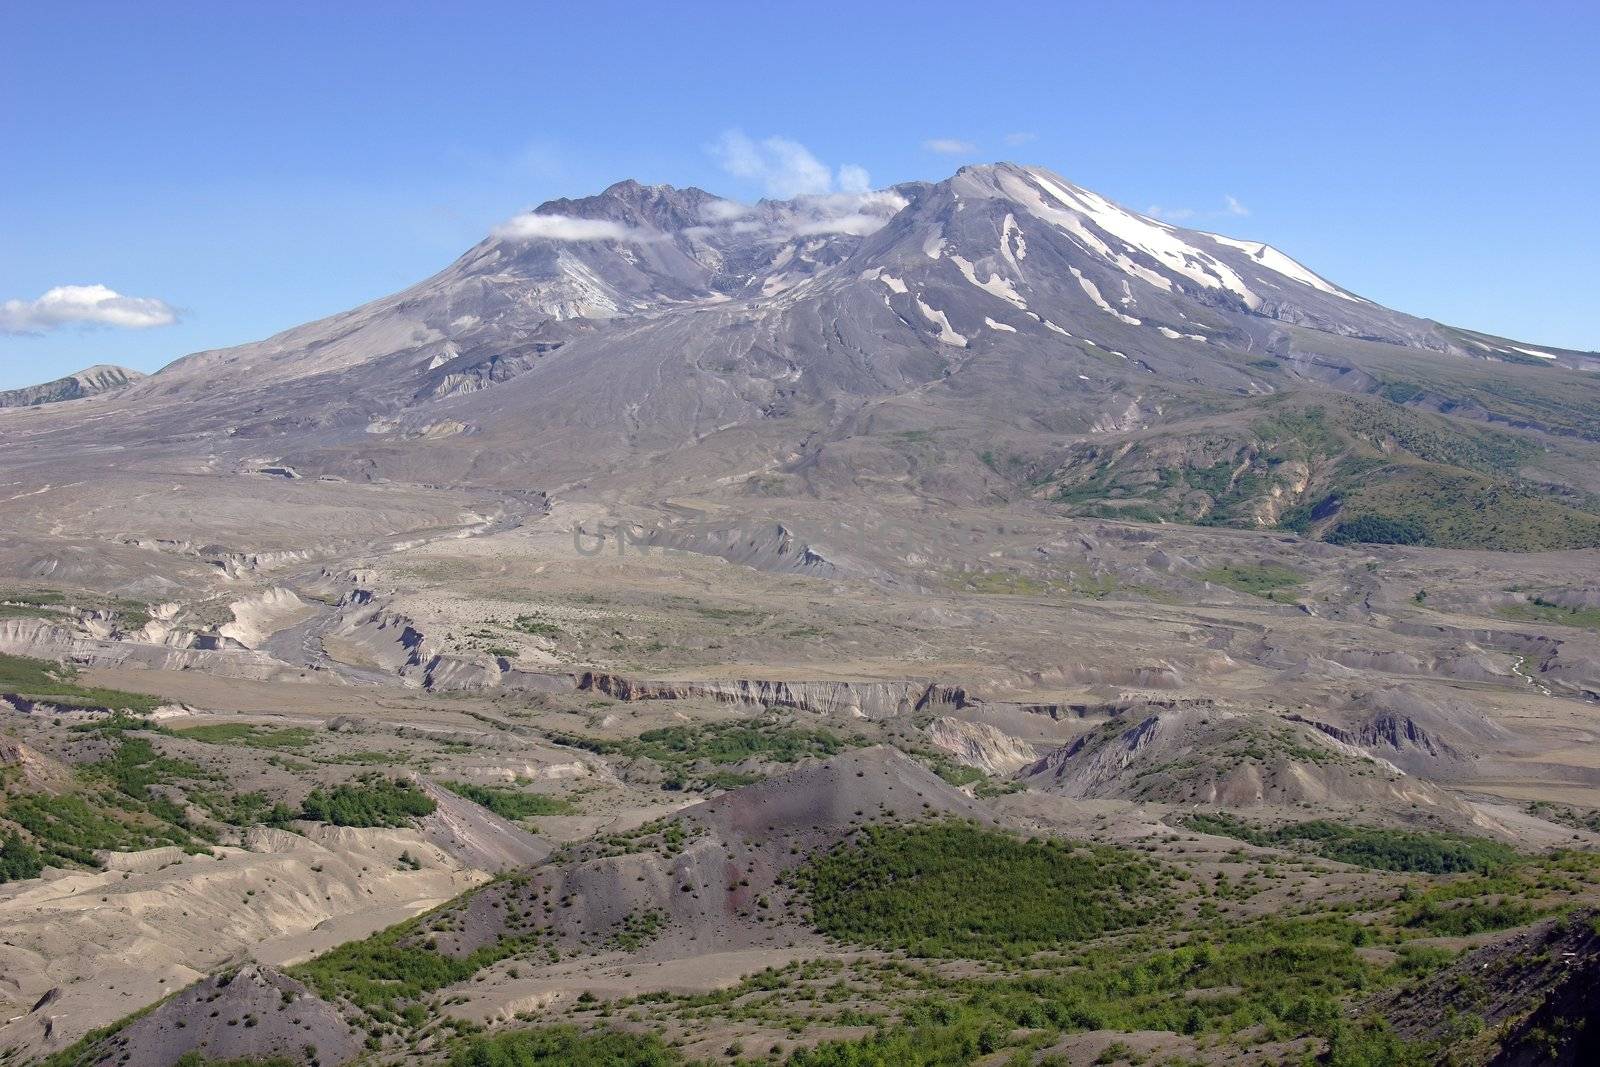 Mount St. Helen's national monument park in the state of Washington.